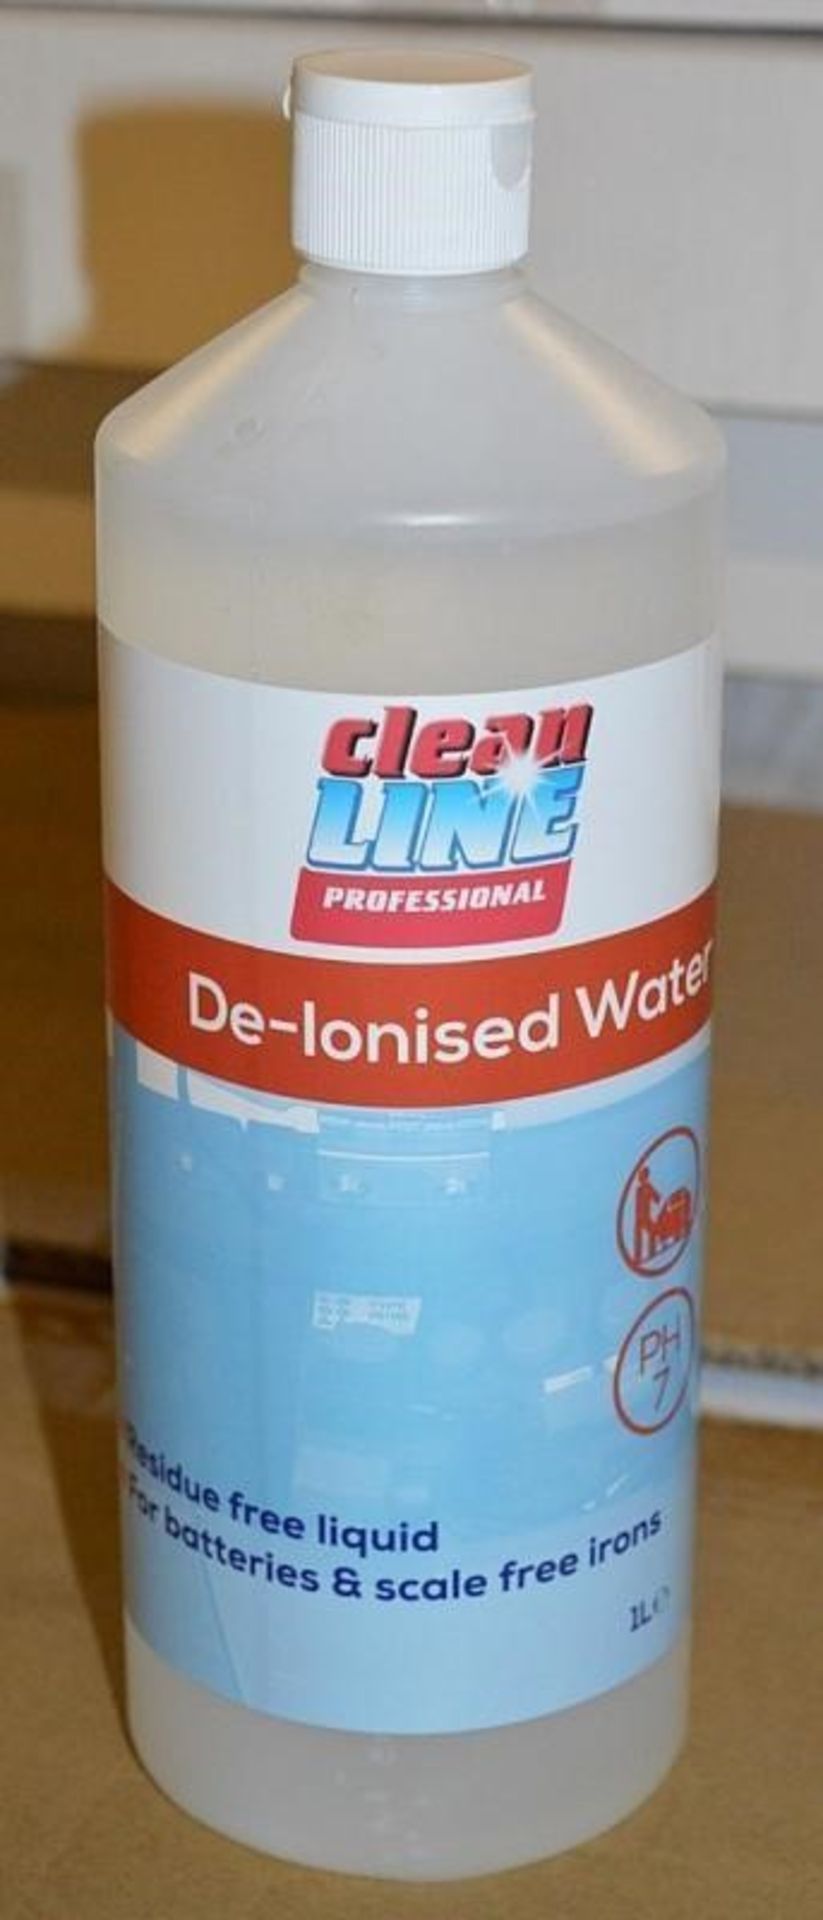 96 x 1-Litre Clean Line Professional Branded De-Ionised (Distilled) Water - New / Unused Stock -